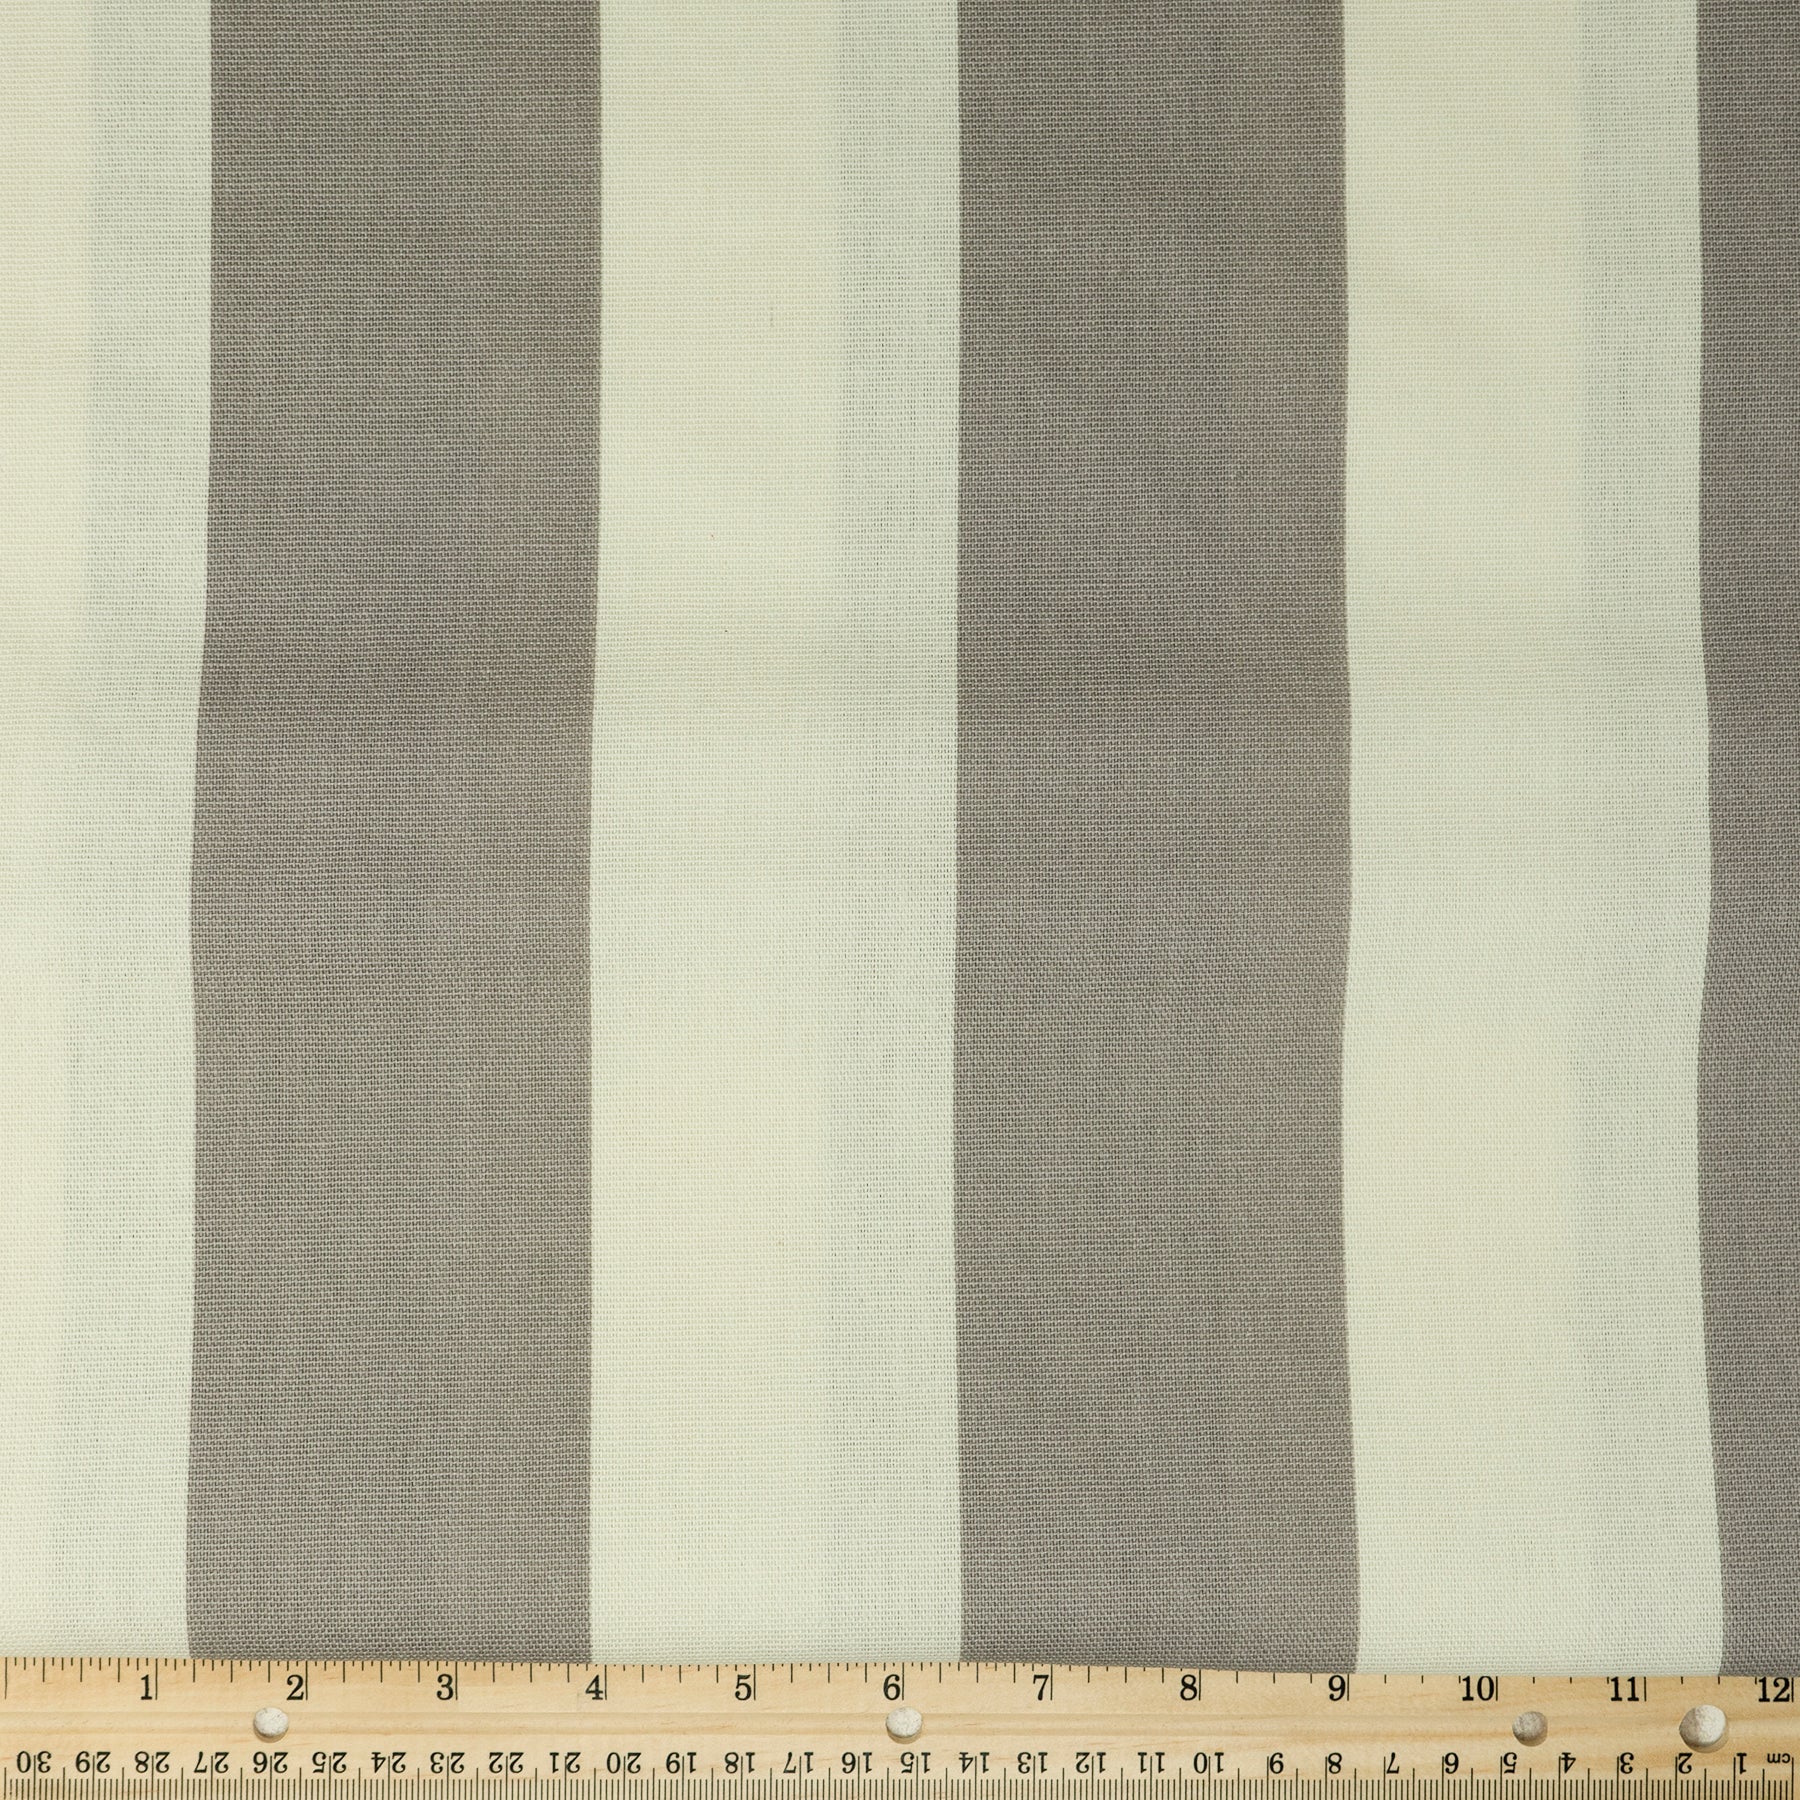 Waverly Inspirations 100% Cotton Duck 45" Width Stripe Grey Color Sewing Fabric by the Yard